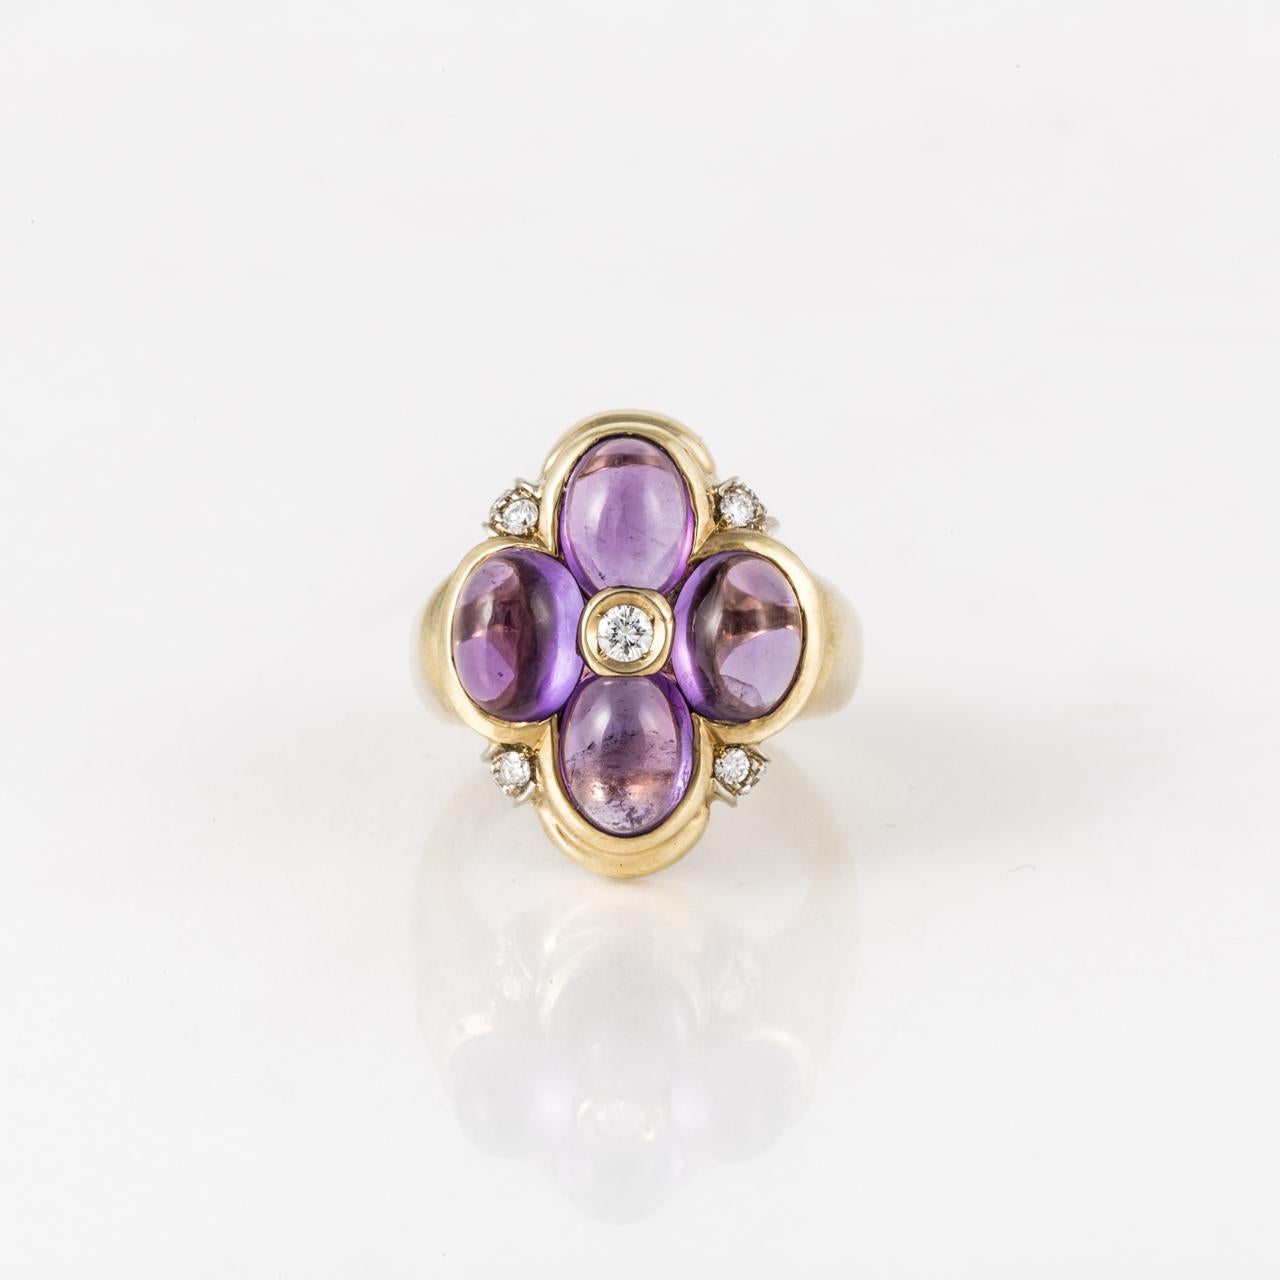 18K yellow gold ring featuring four oval cabochon amethyst stones in a clover-leaf design accented by round diamonds.  The nine round diamonds total 0.35 carats; H-I color and VS clarity.  Measures 7/8 inches long and 11/16 inches wide.  Size 6.25